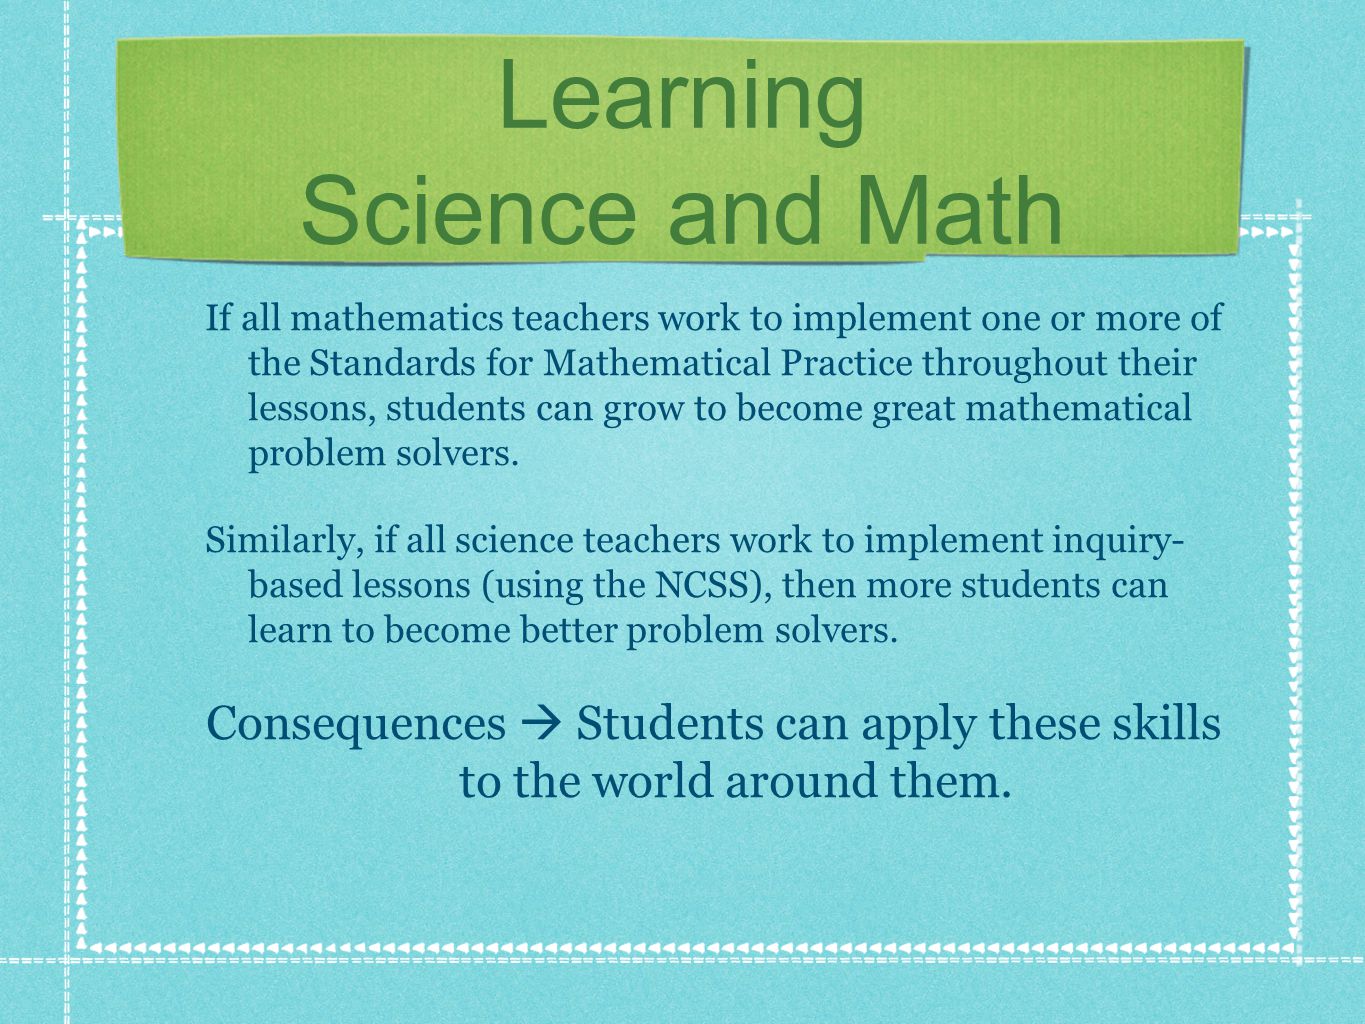 Learning Science and Math If all mathematics teachers work to implement one or more of the Standards for Mathematical Practice throughout their lessons, students can grow to become great mathematical problem solvers.